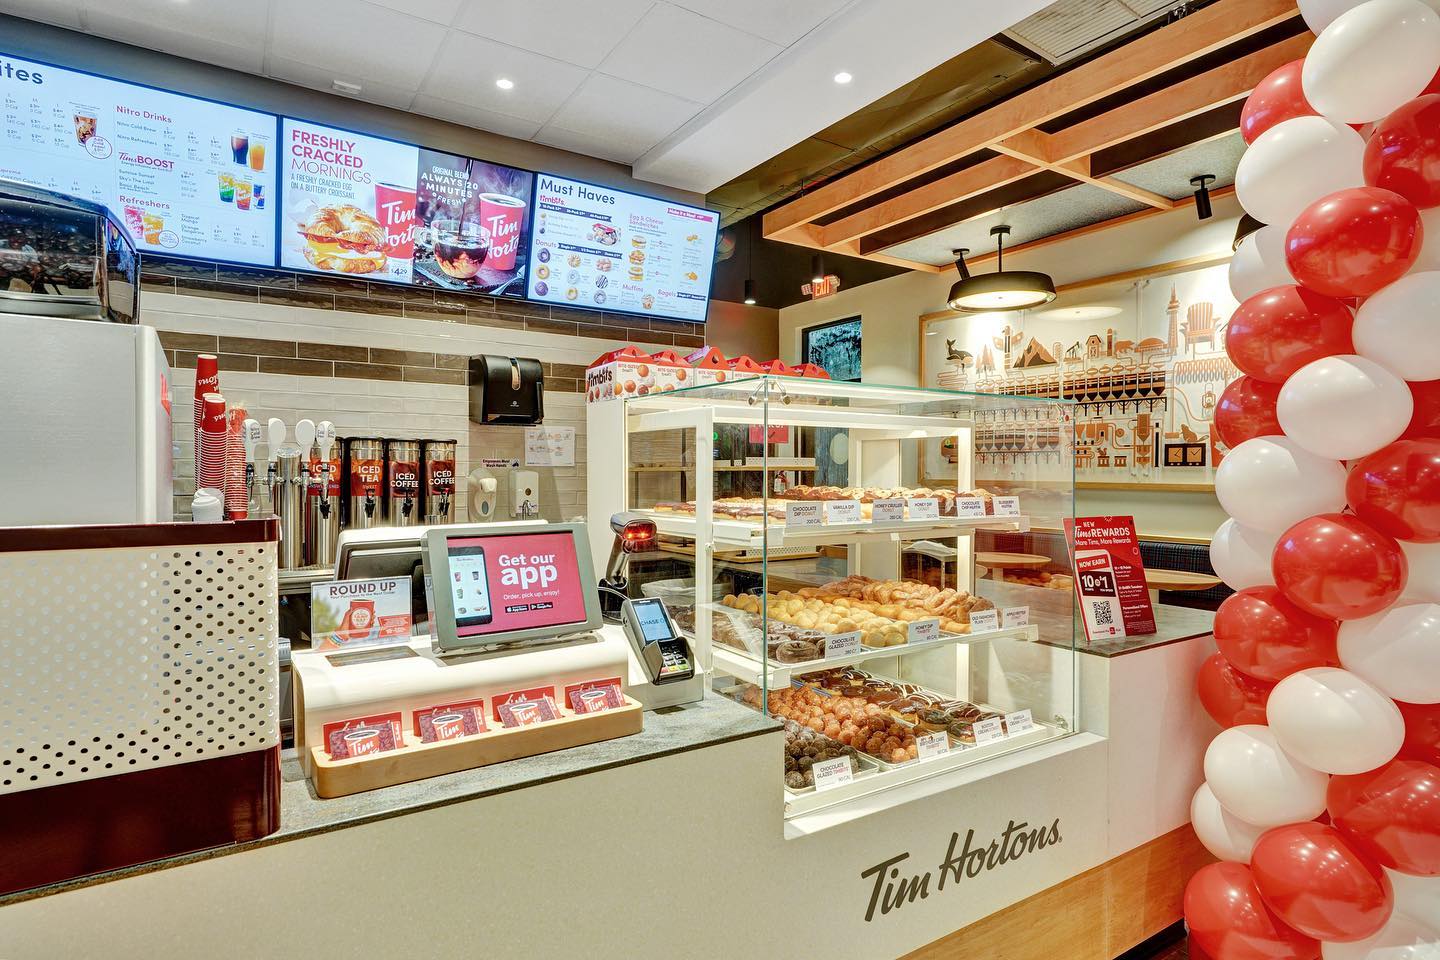 Tim Hortons to Open New Coffee Shop in Cypress Next Year